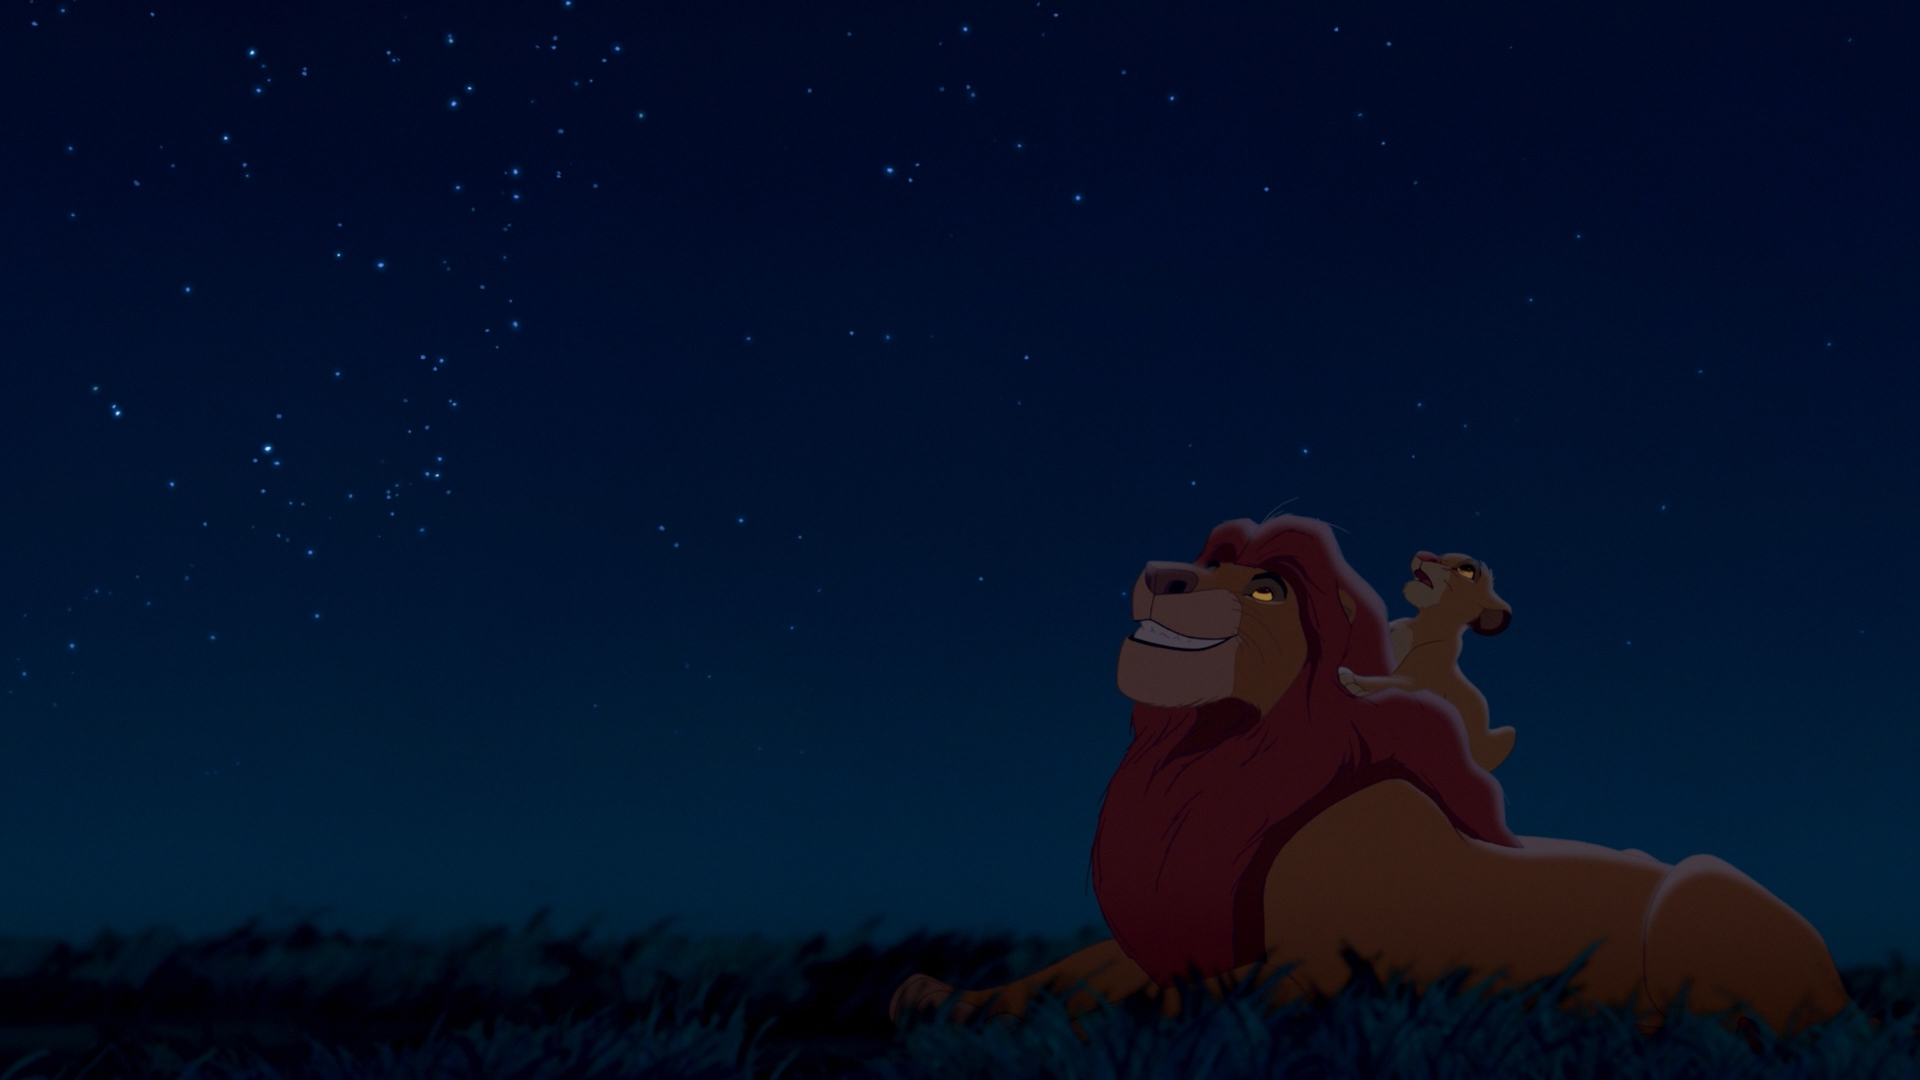 Simba And Mufasa At Night From Shadow Of Death - Simba And Mufasa Stars , HD Wallpaper & Backgrounds